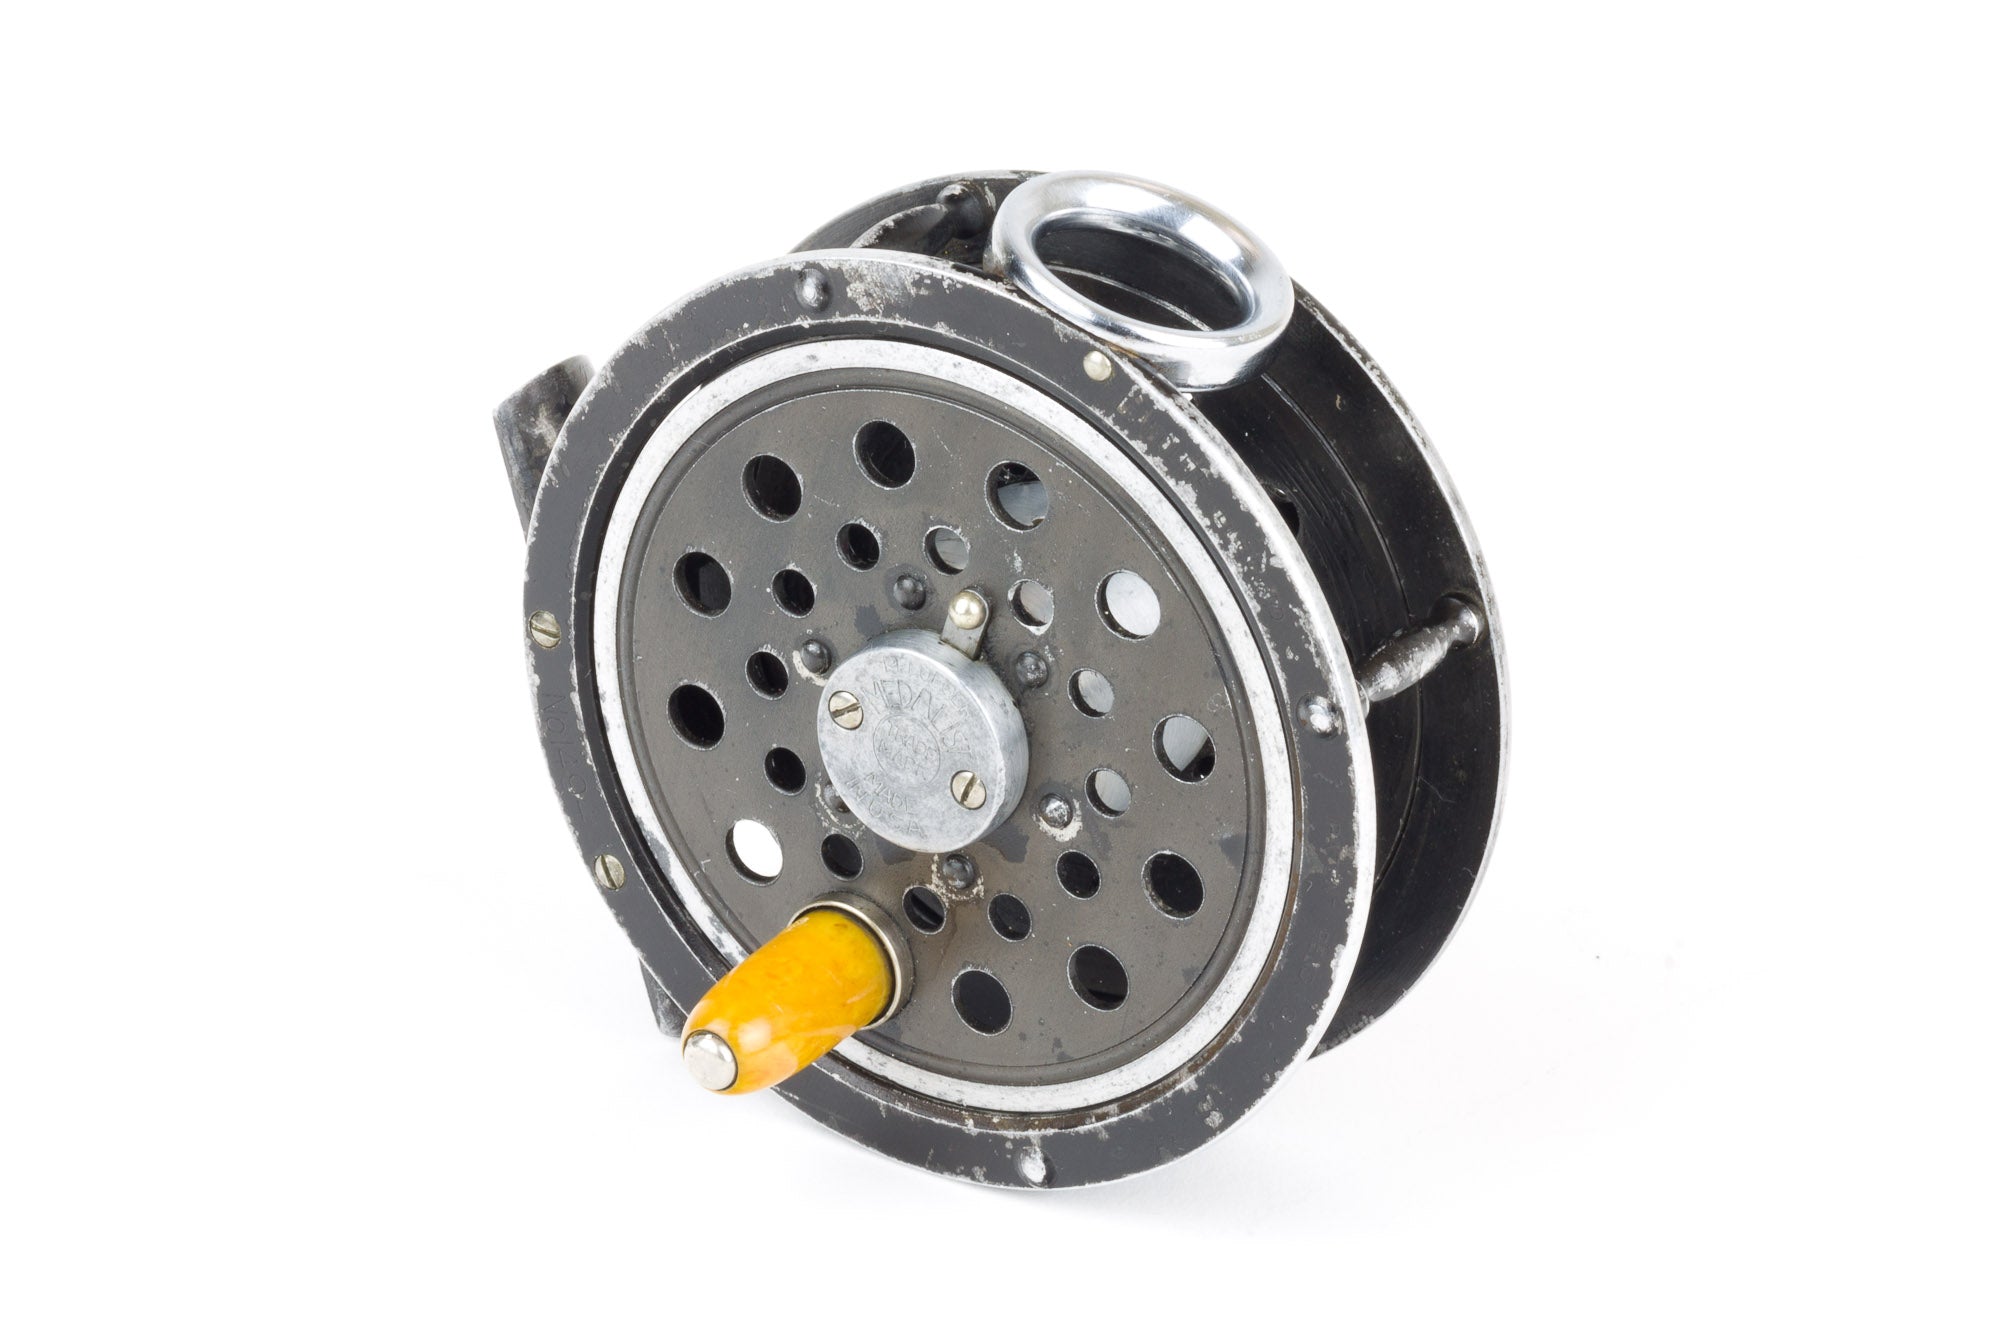 Pflueger 1149988 1195 Automatic Fly Reel 10156 for sale online